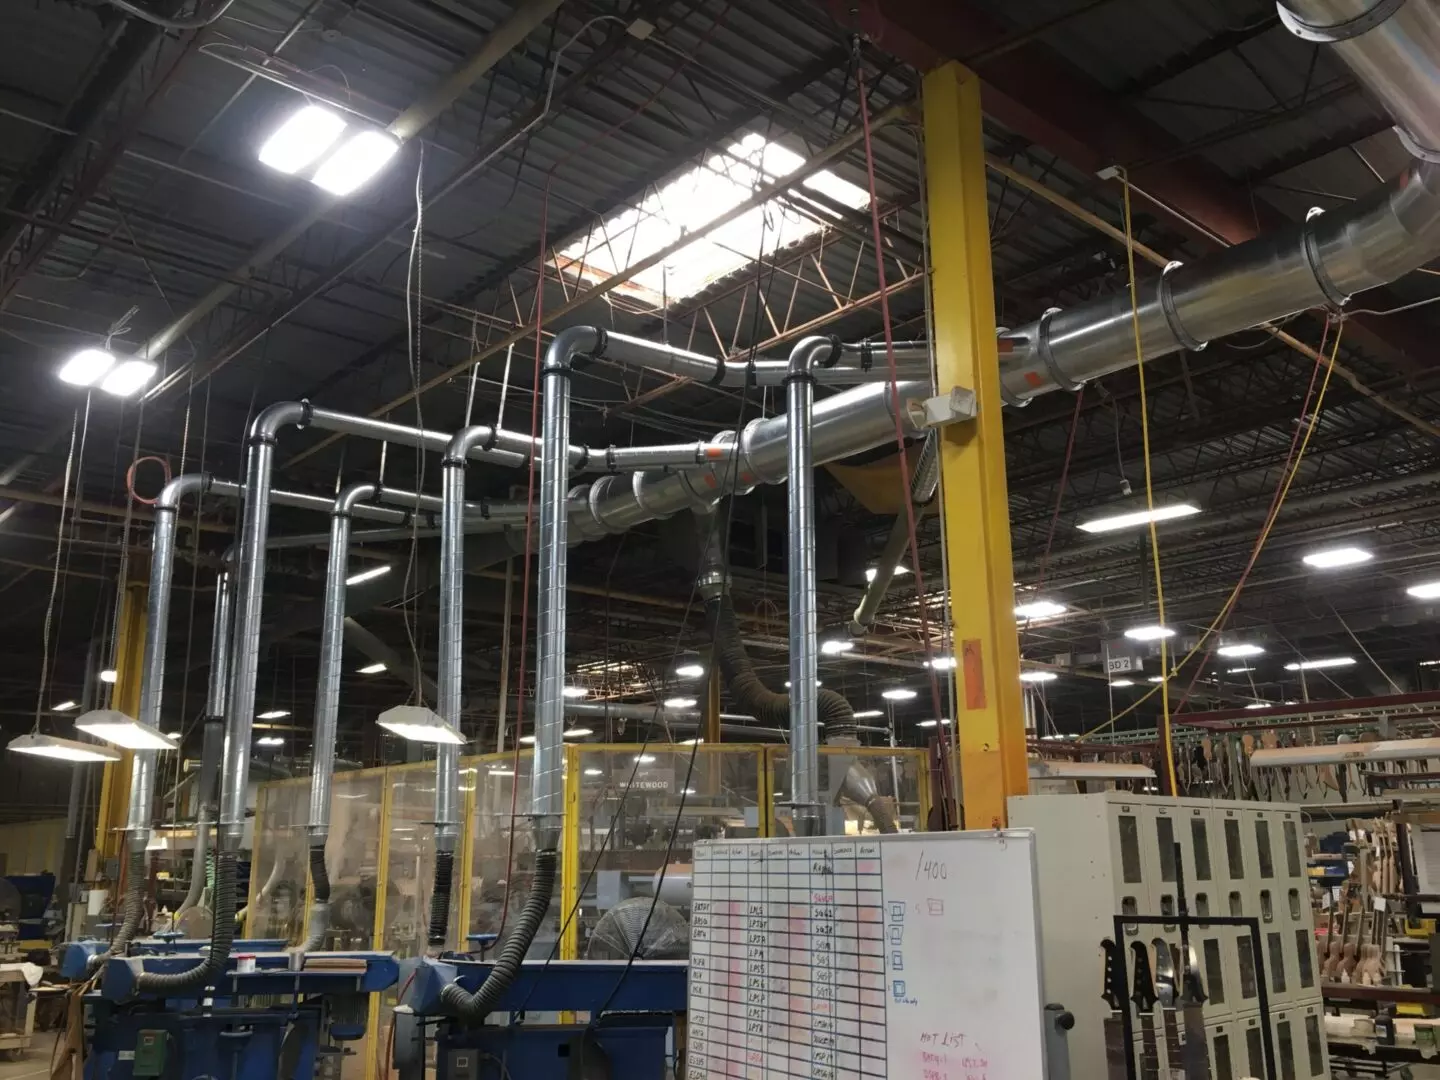 A factory with pipes and wires hanging from the ceiling.